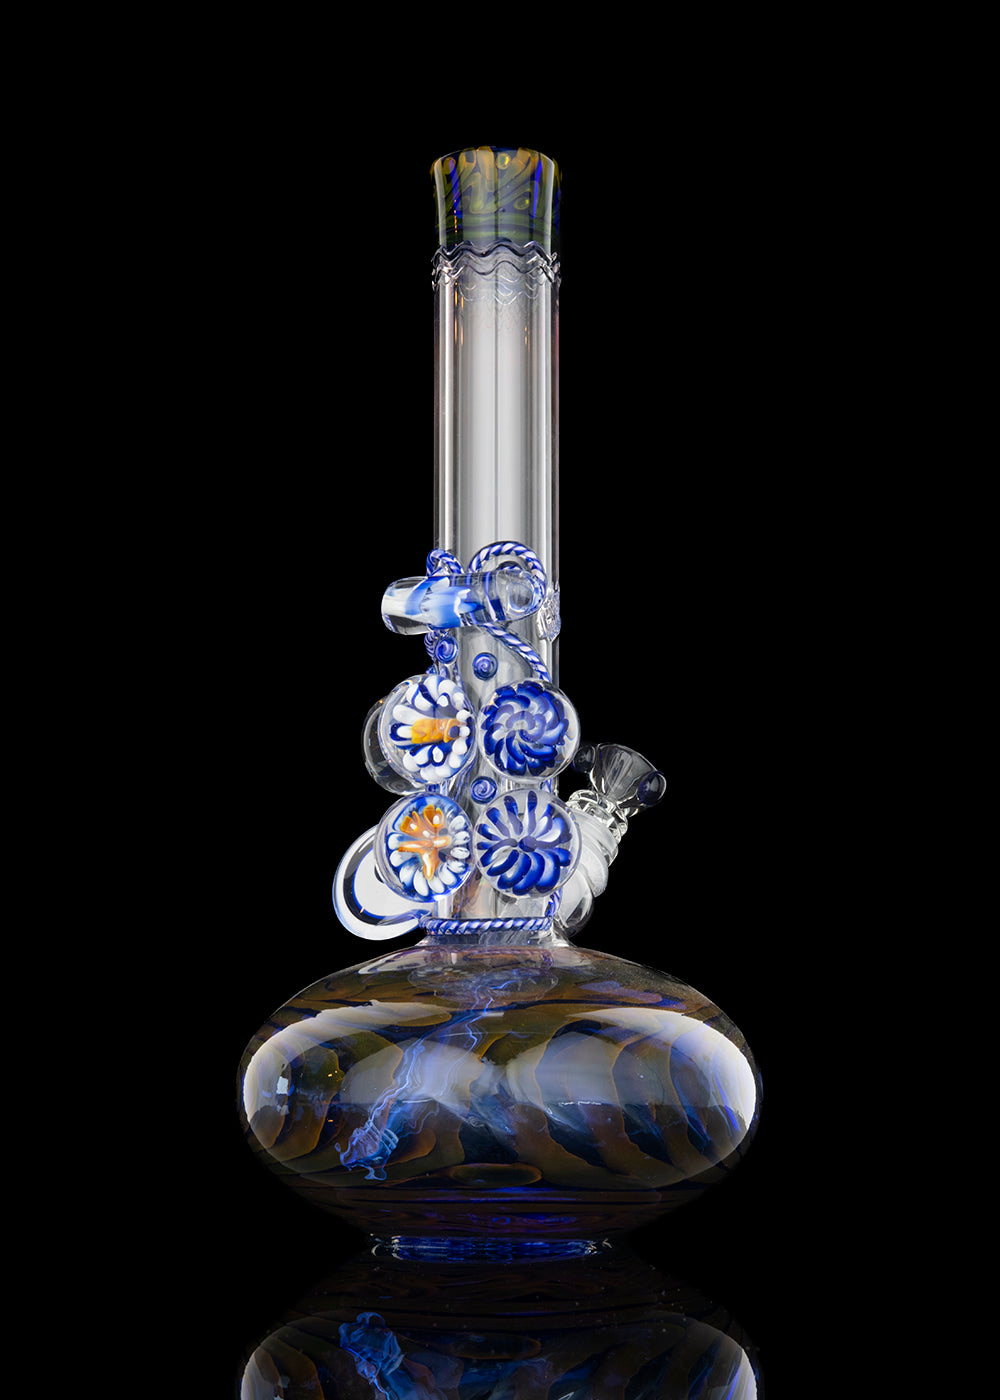 HVY Mini Atlas 38mm Cobalt Coiled with 7 Marbles Tube